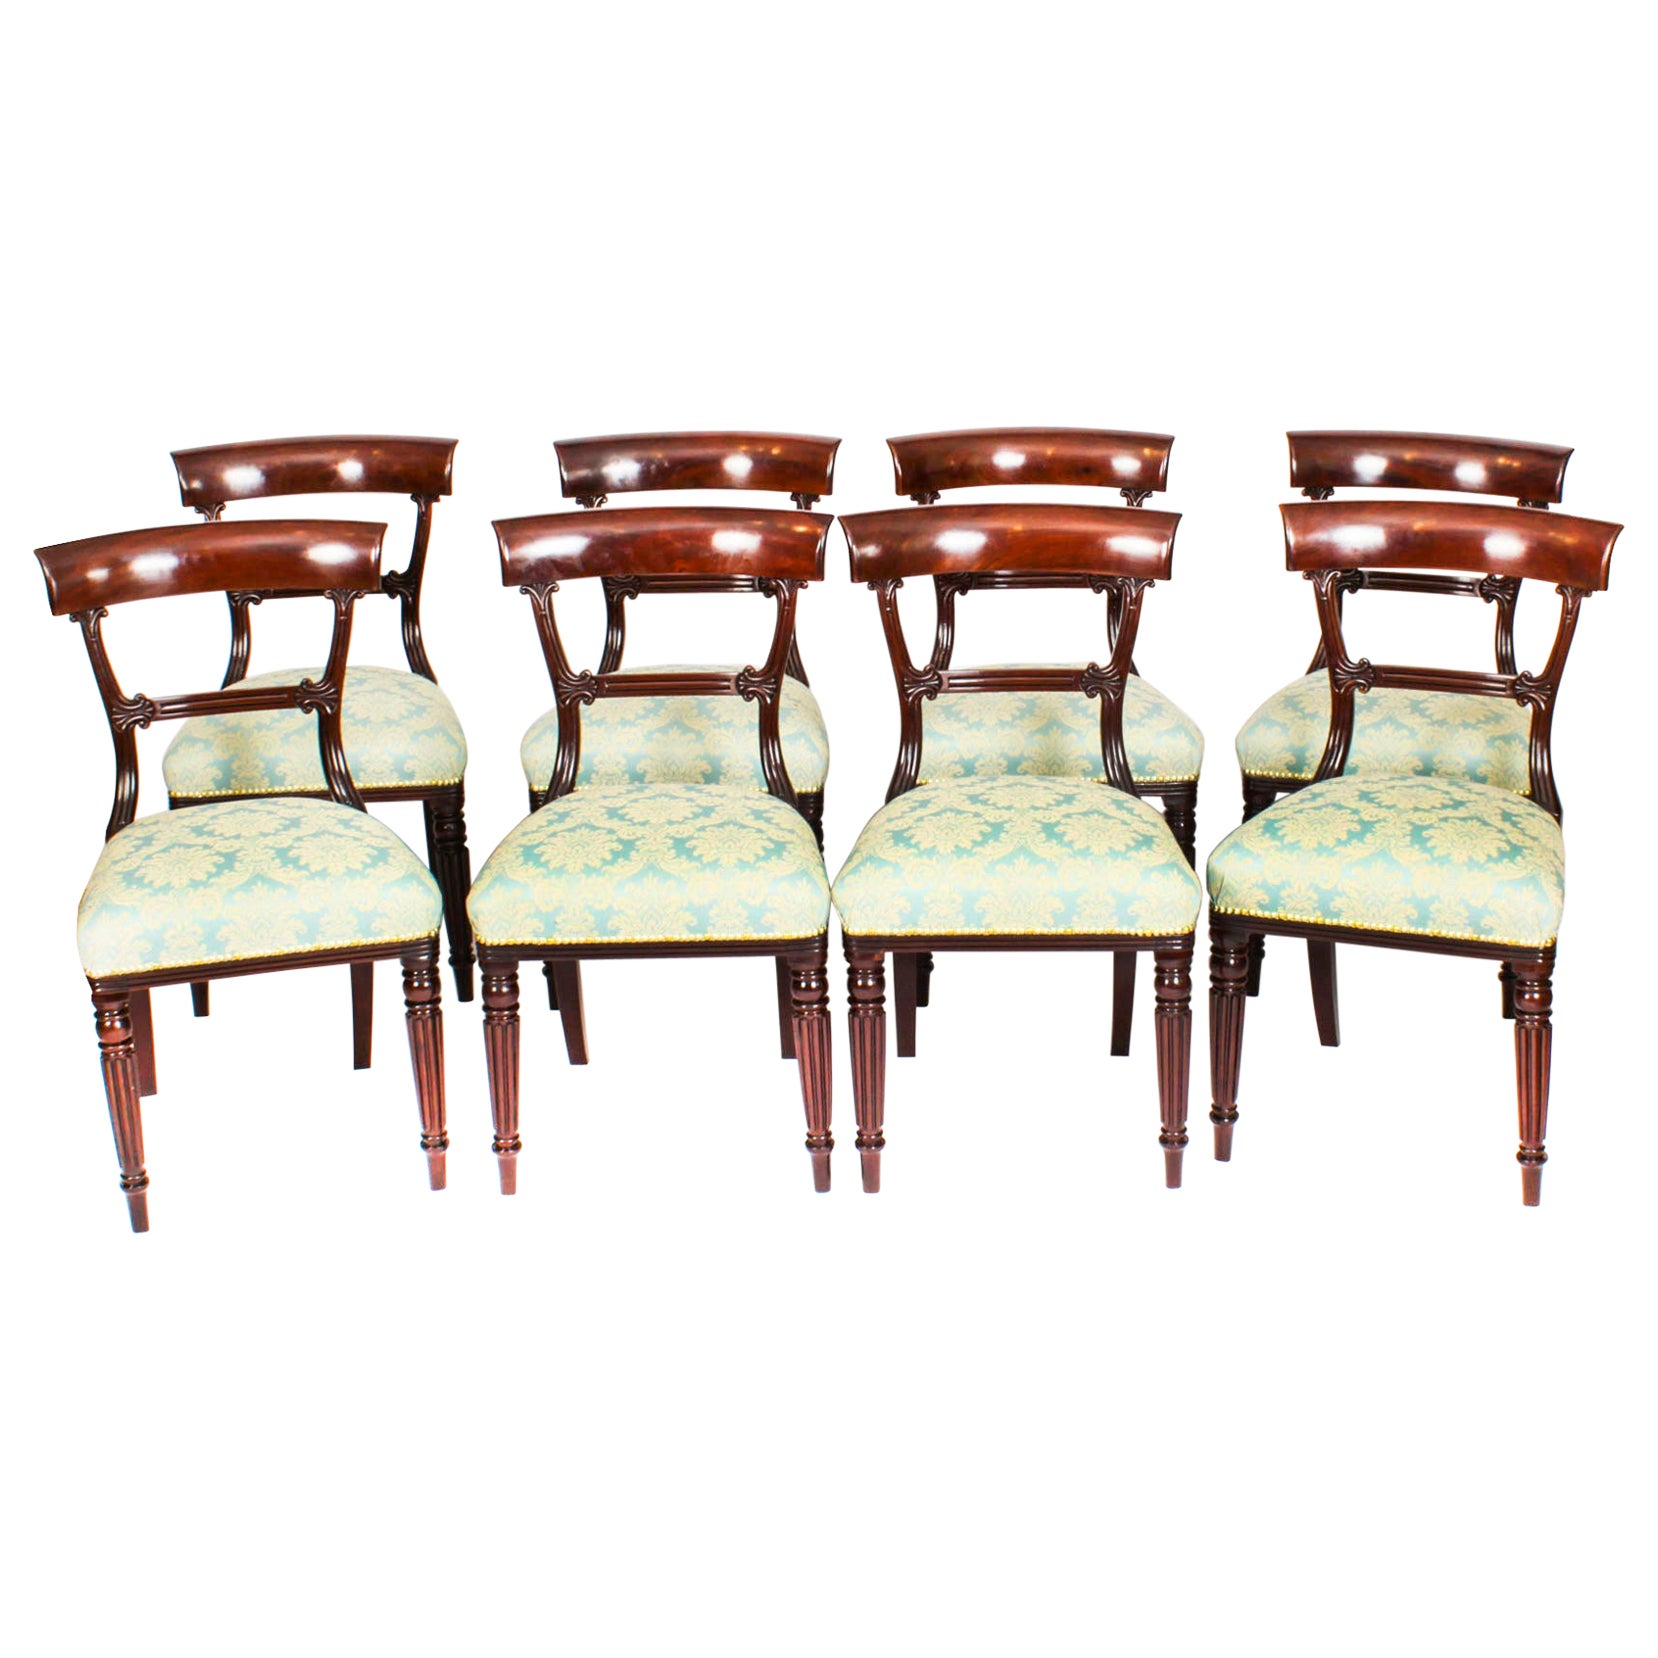 Antique Set 8 English William IV Barback Dining Chairs Circa 1830 19th C For Sale